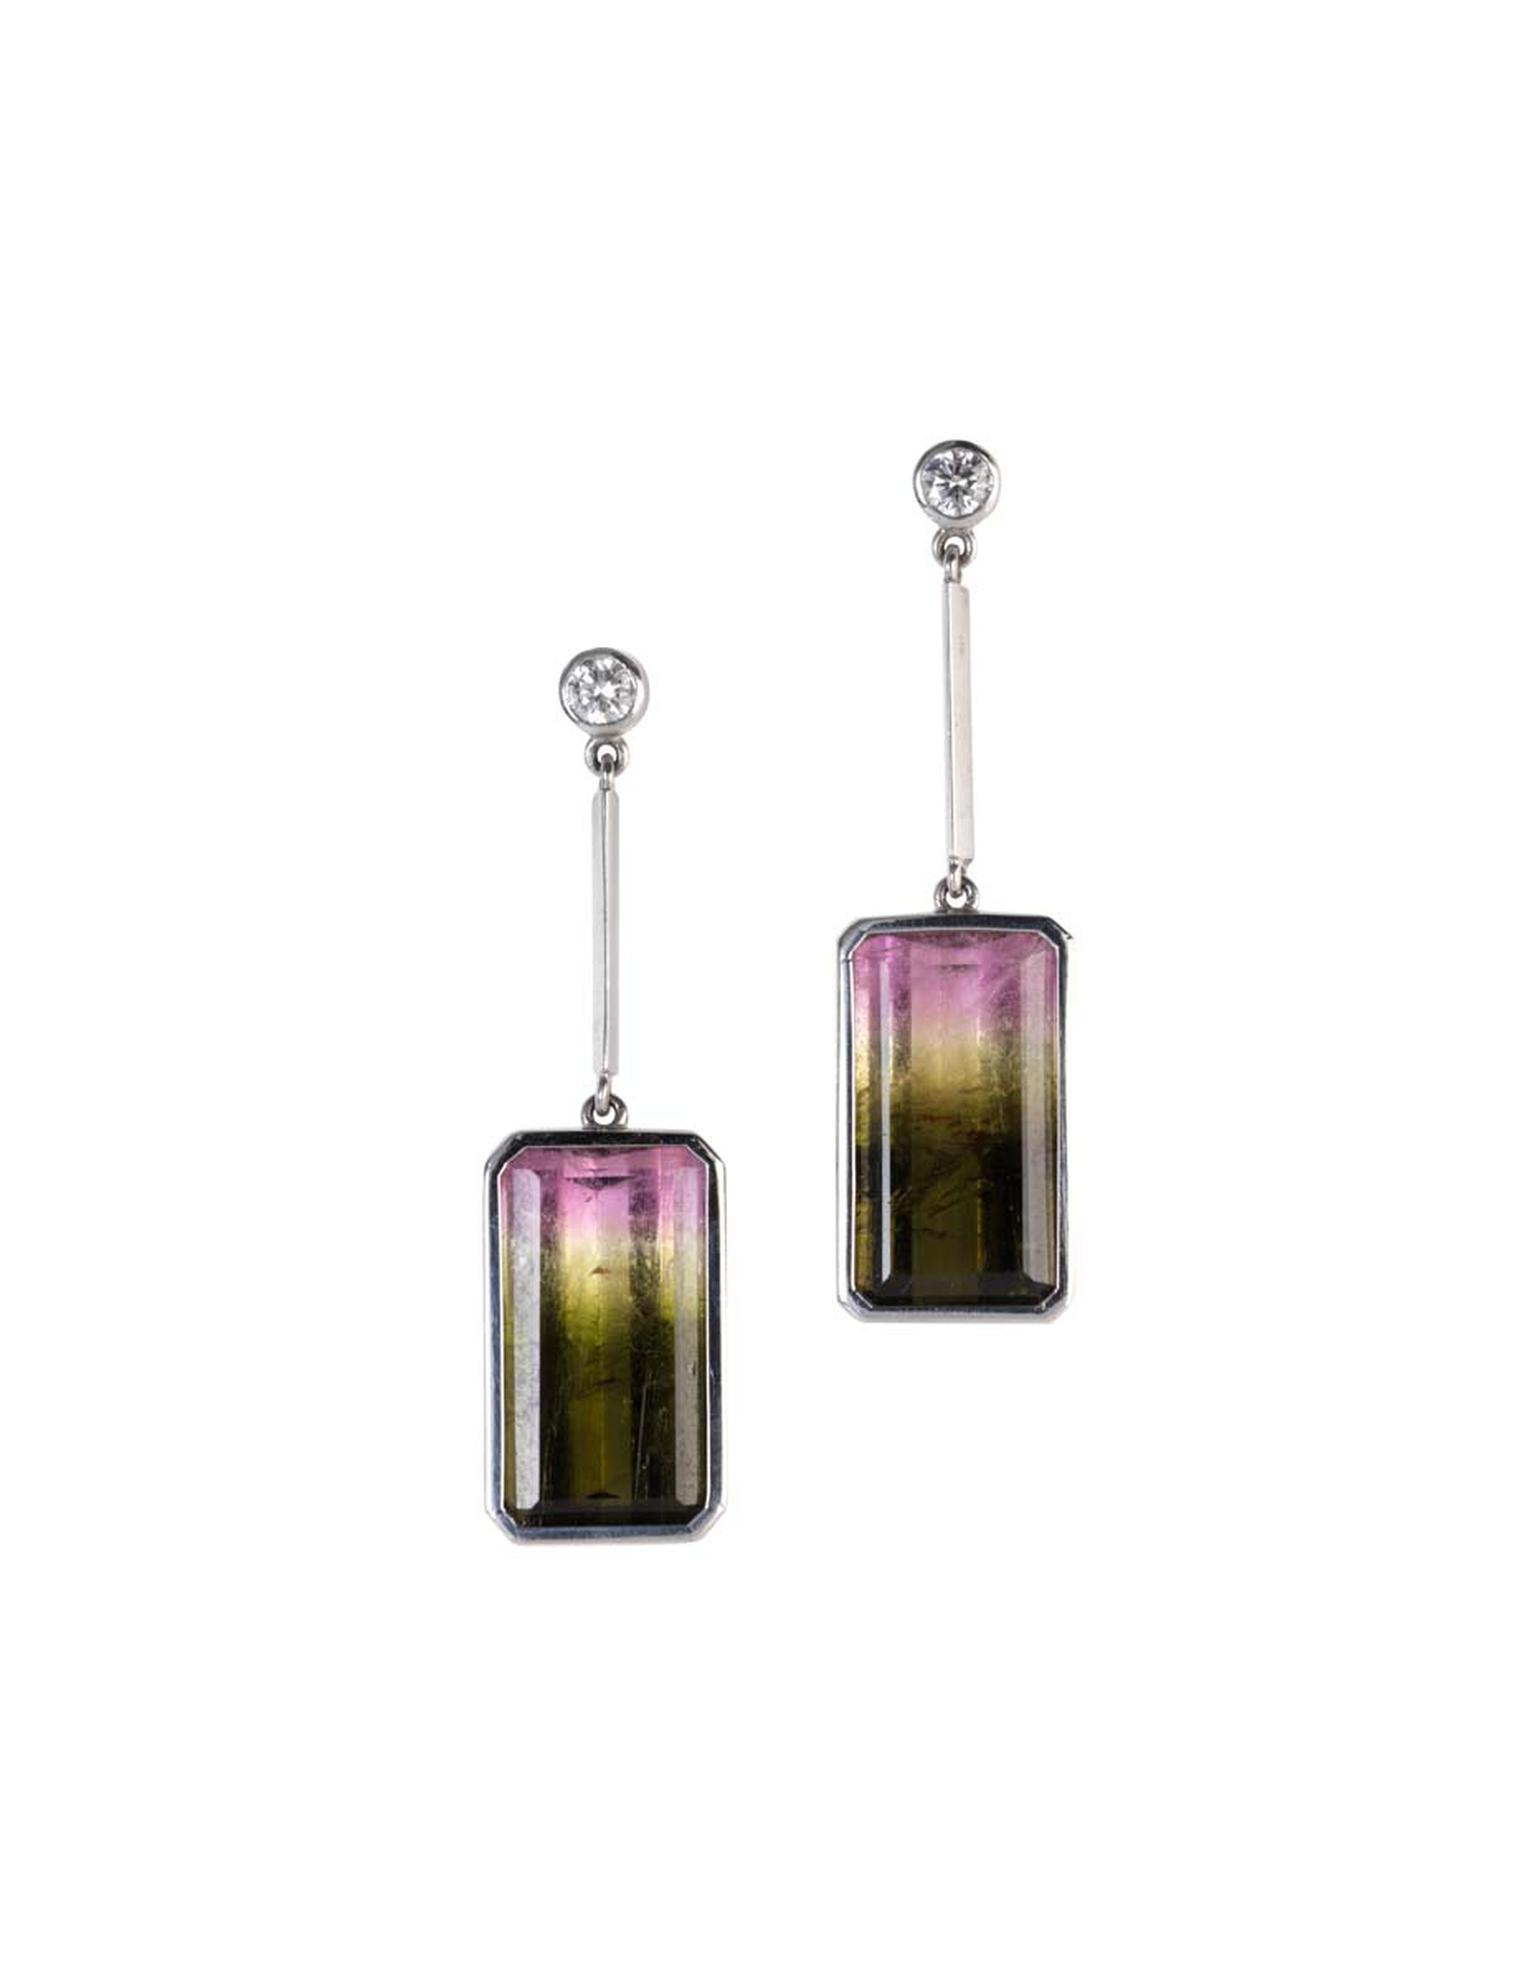 Holts octagon-cut tourmaline earrings in white gold with diamond accents.